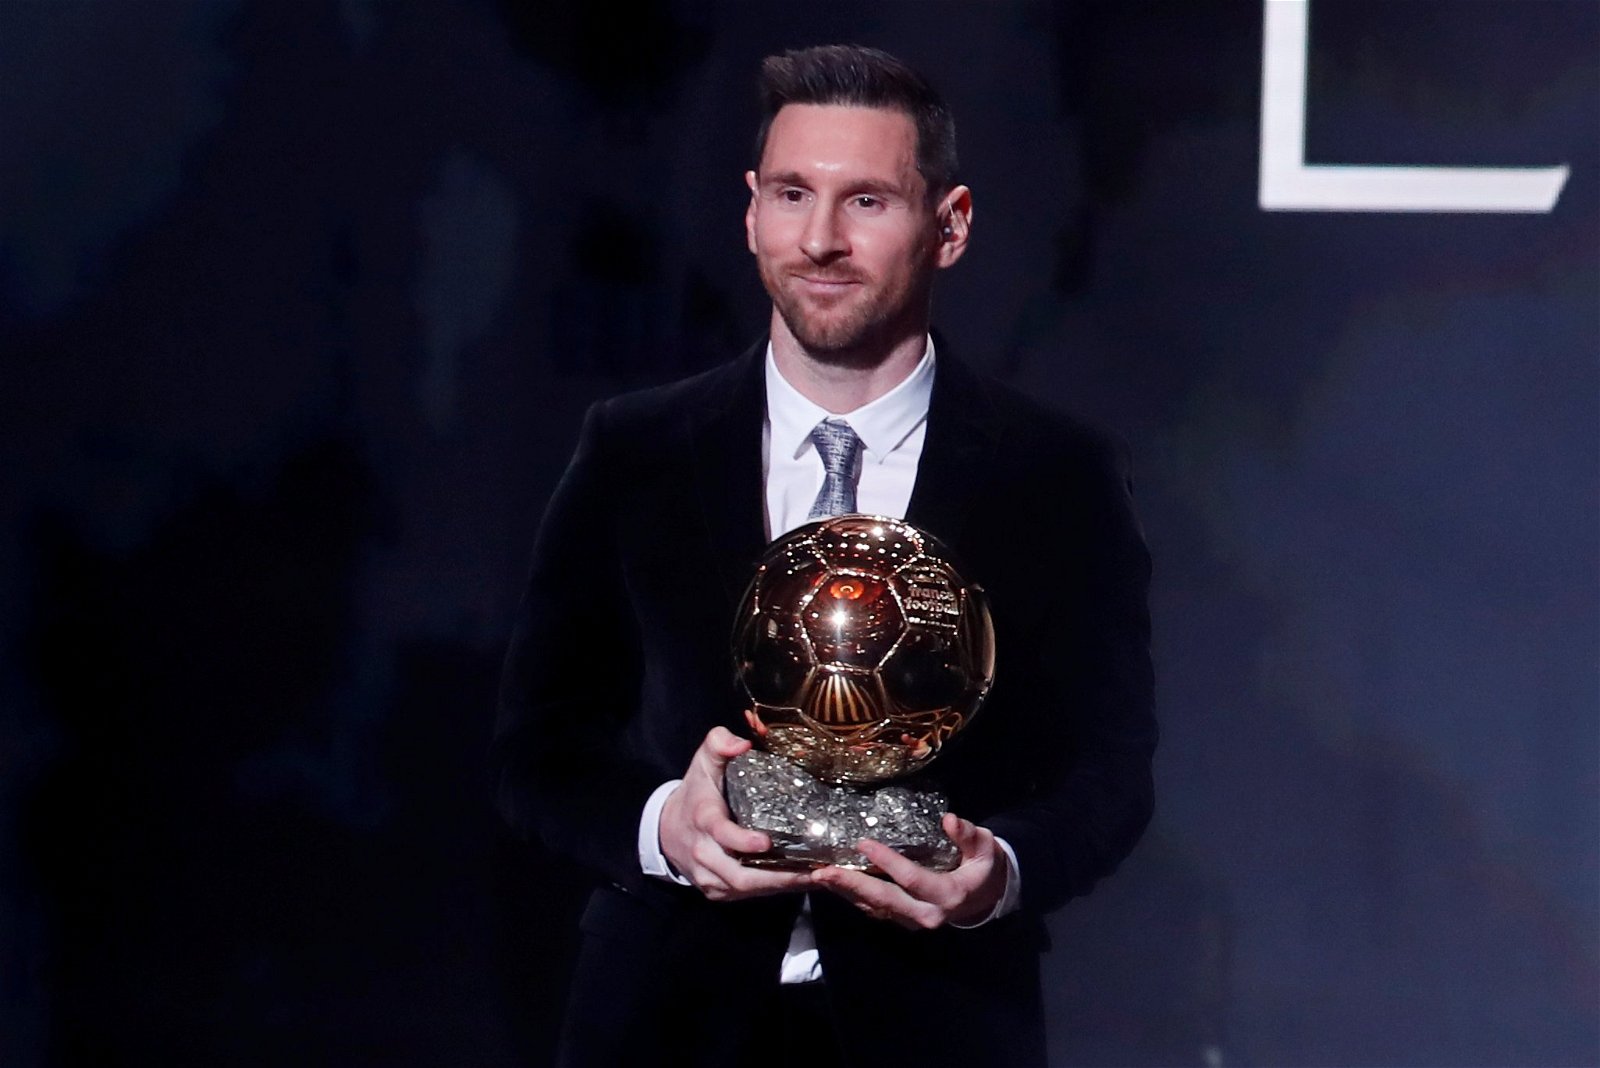 PSG to resume contract talks with Lionel Messi after World Cup